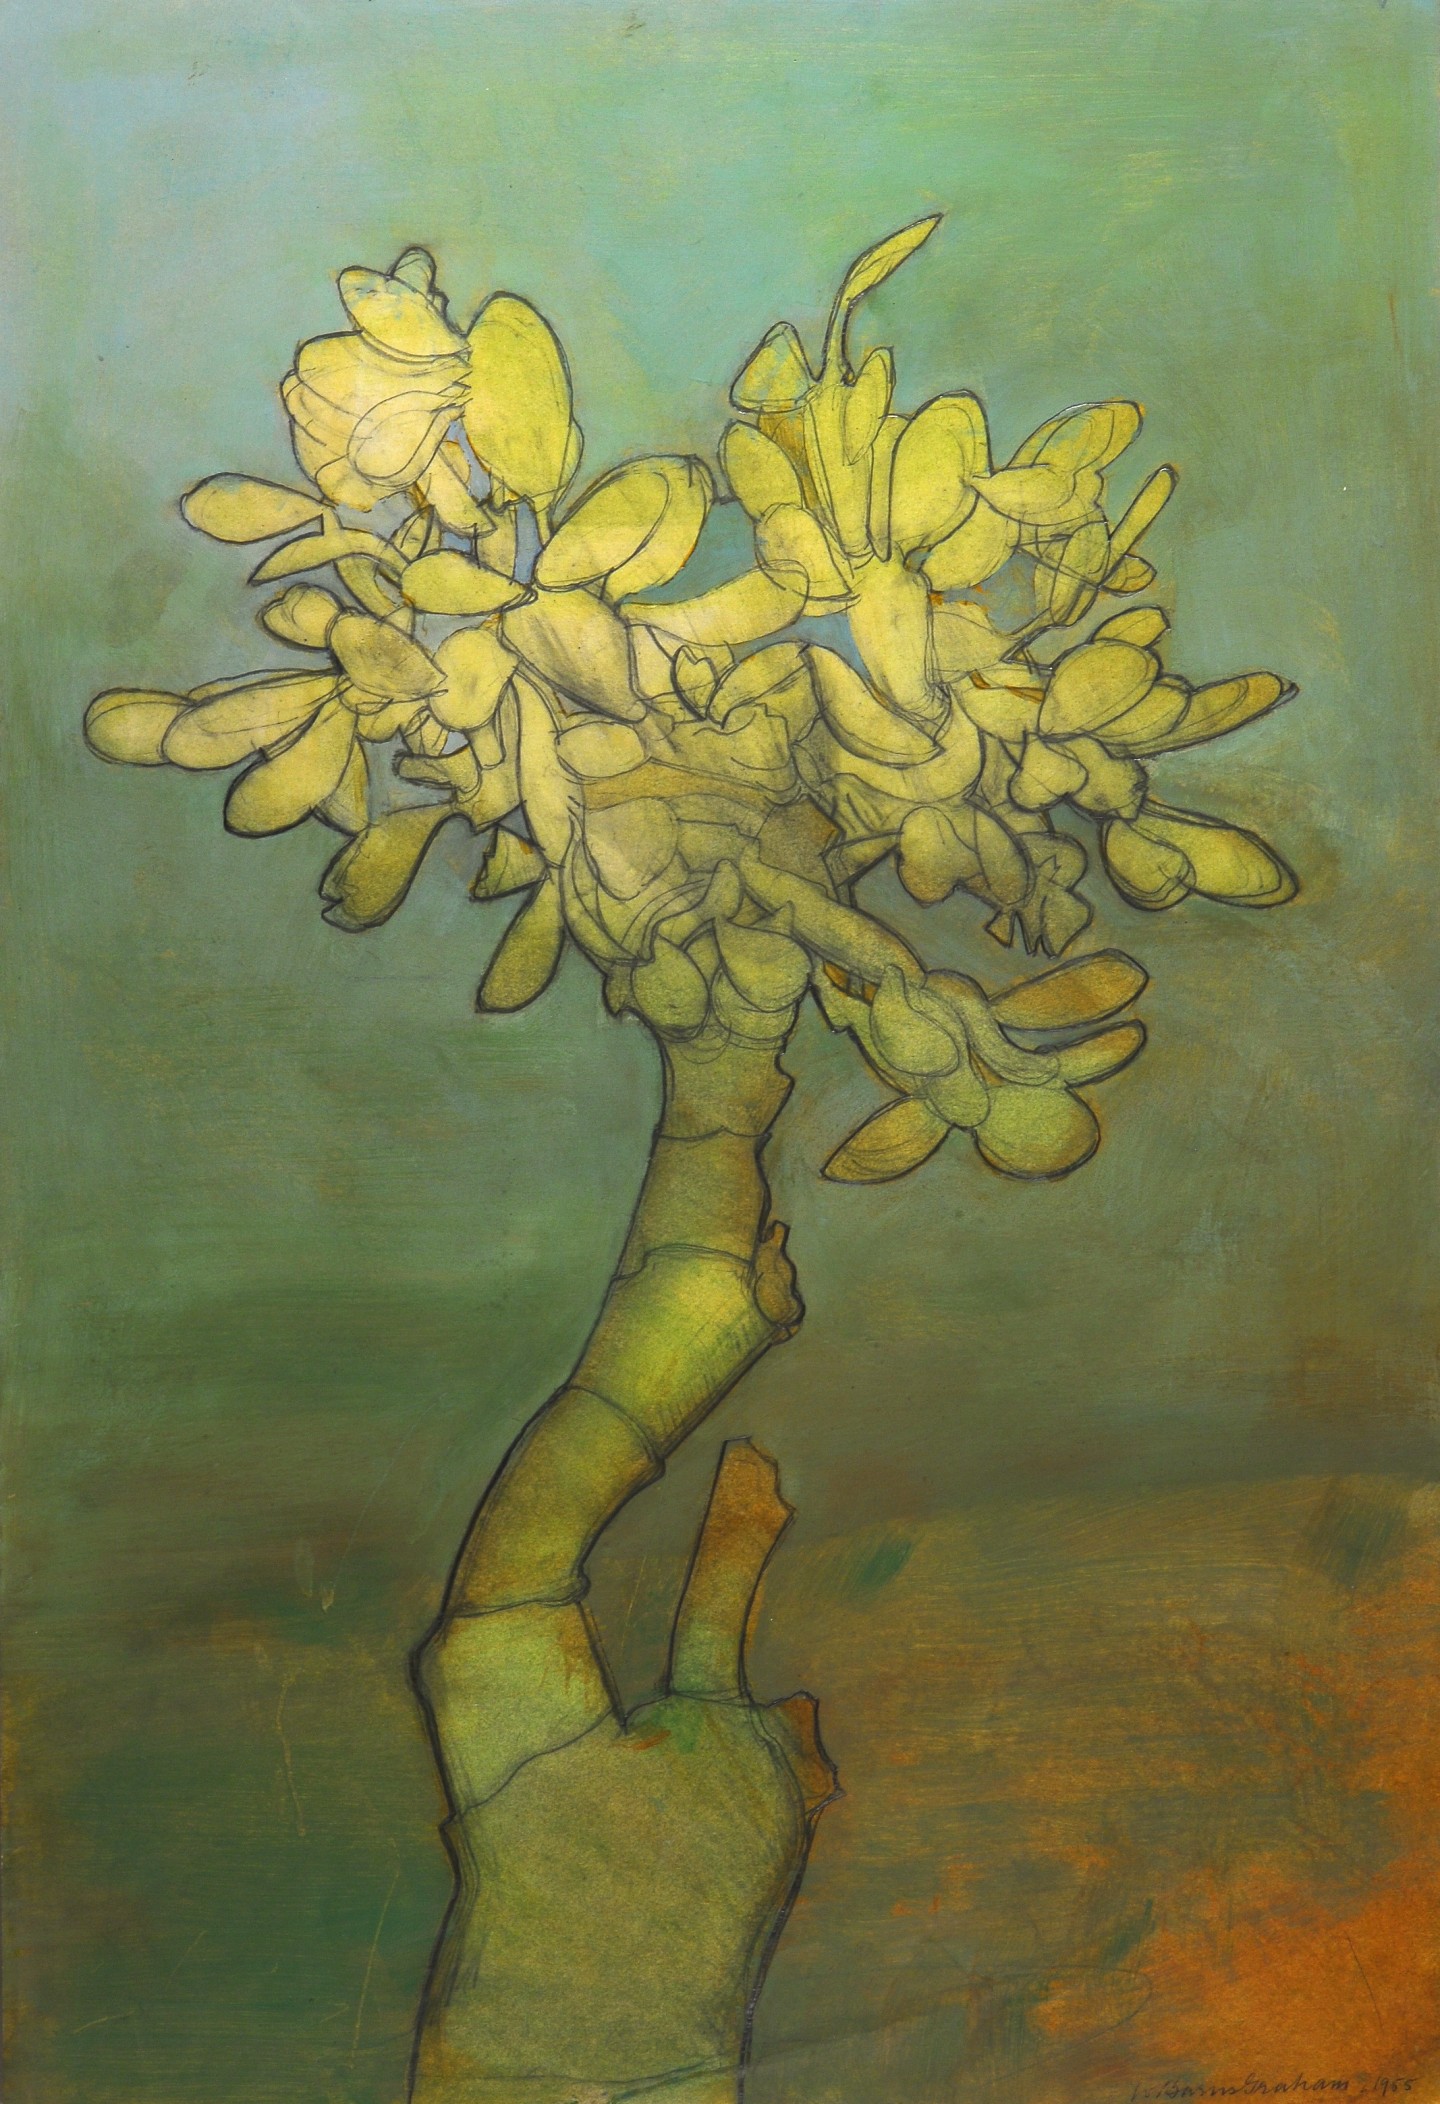 Cactus Tree, 1955, pencil and oil on paper